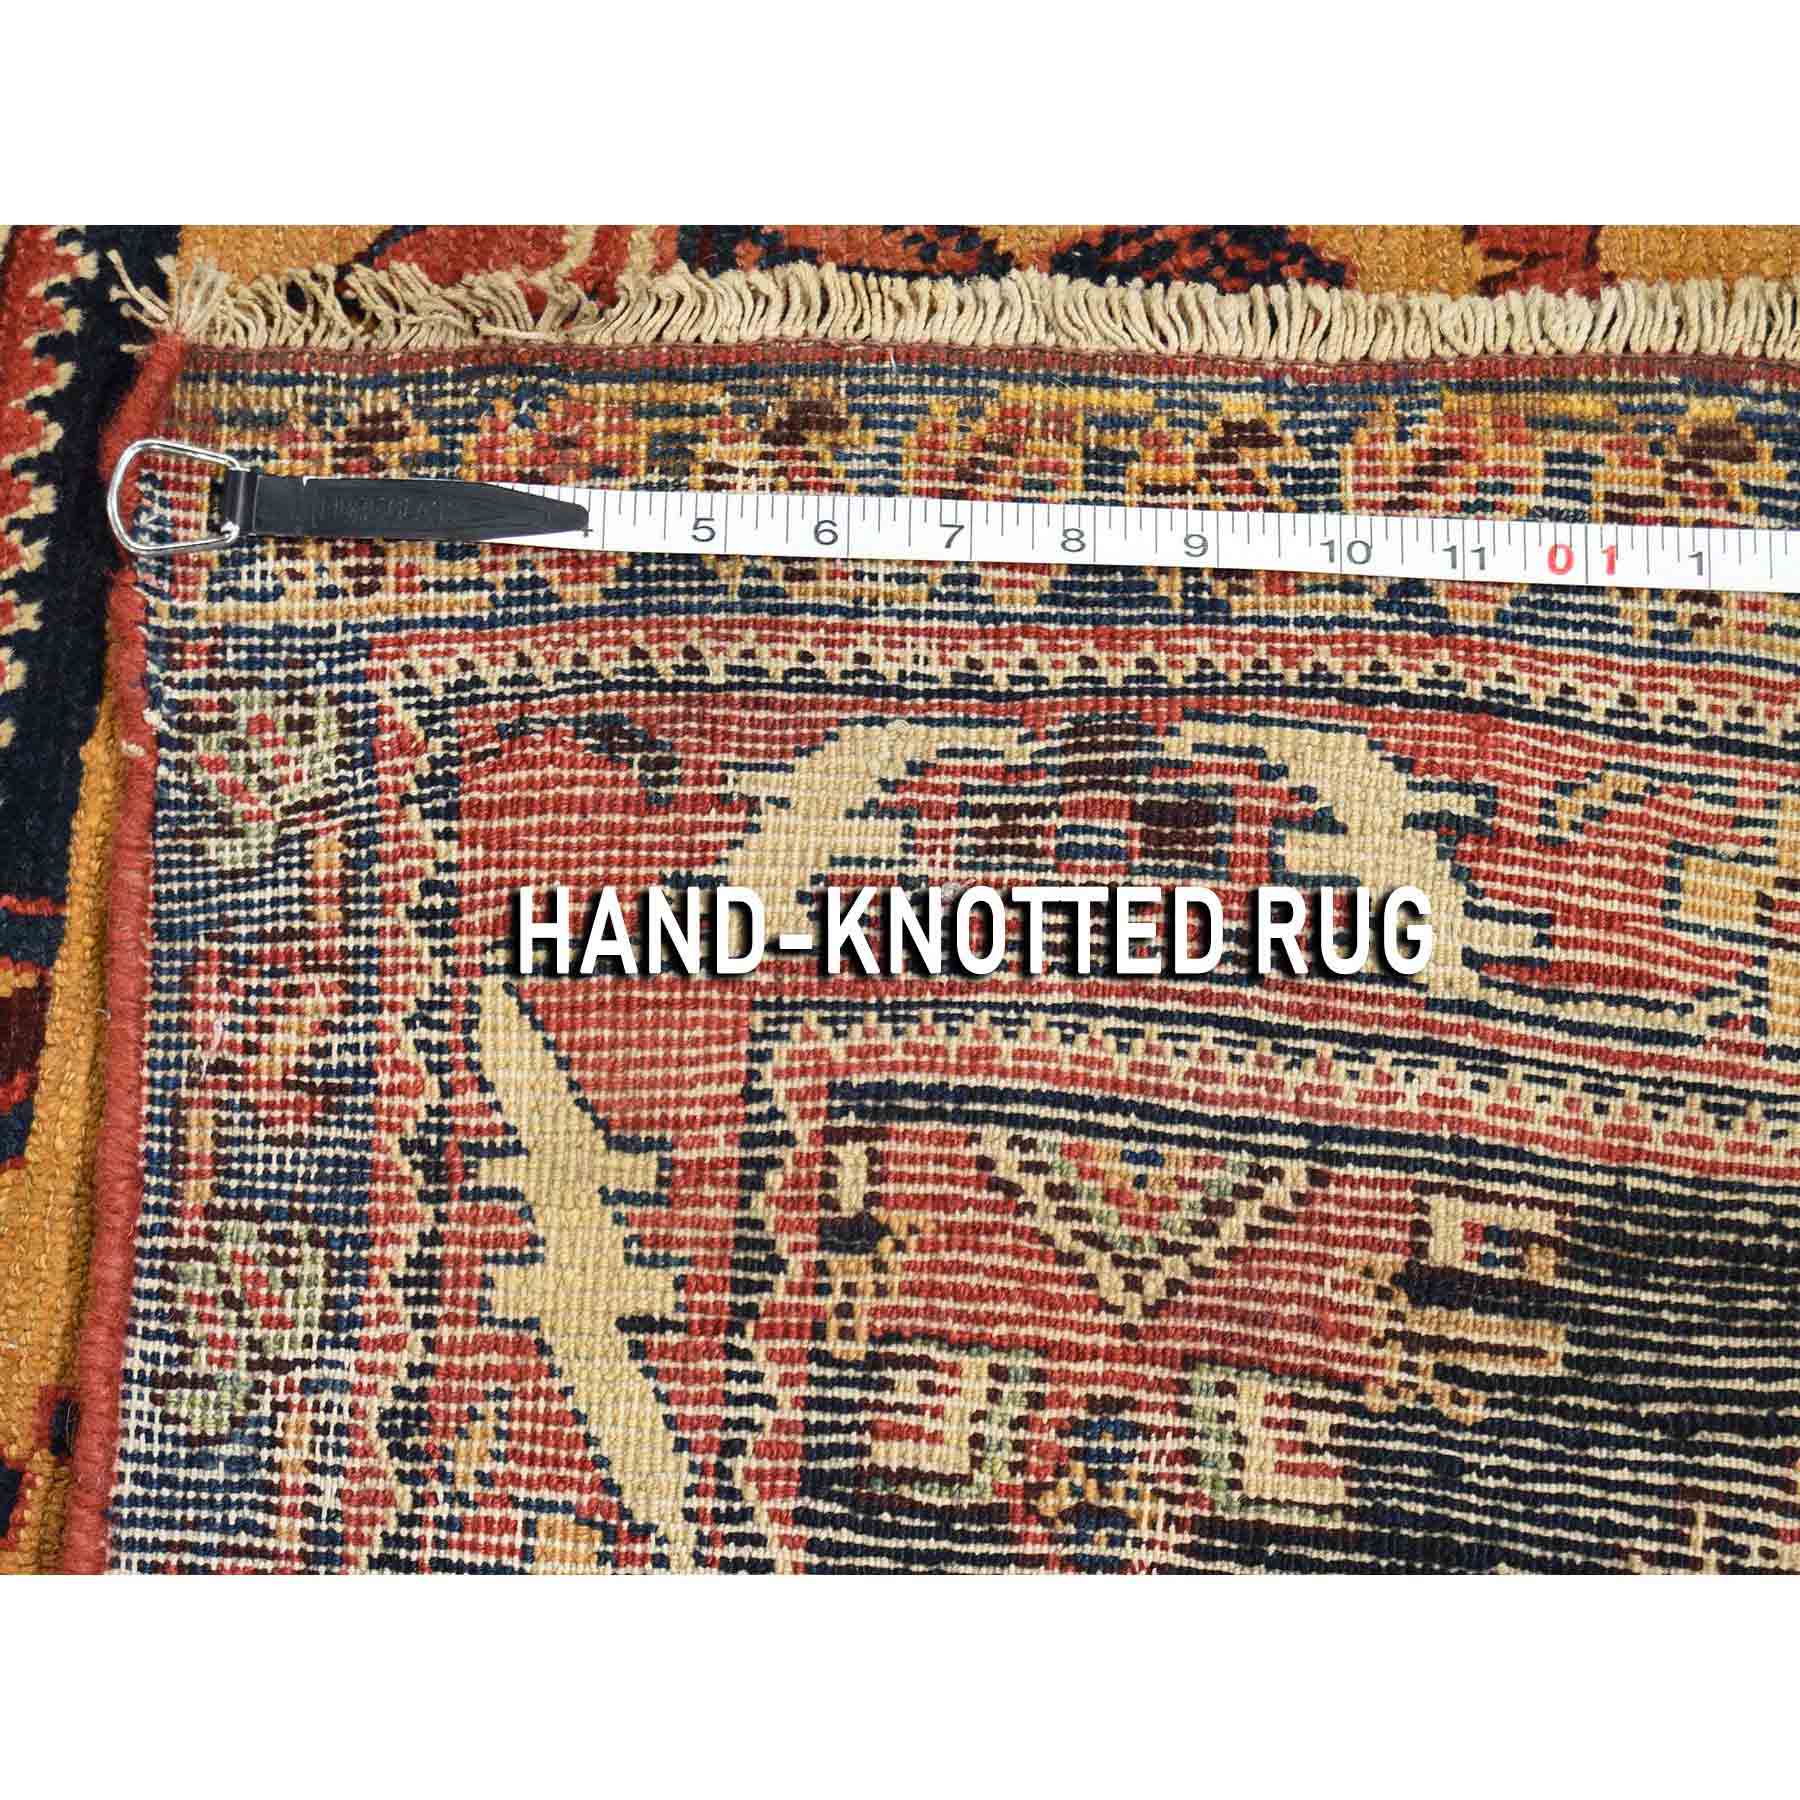 Antique-Hand-Knotted-Rug-224360